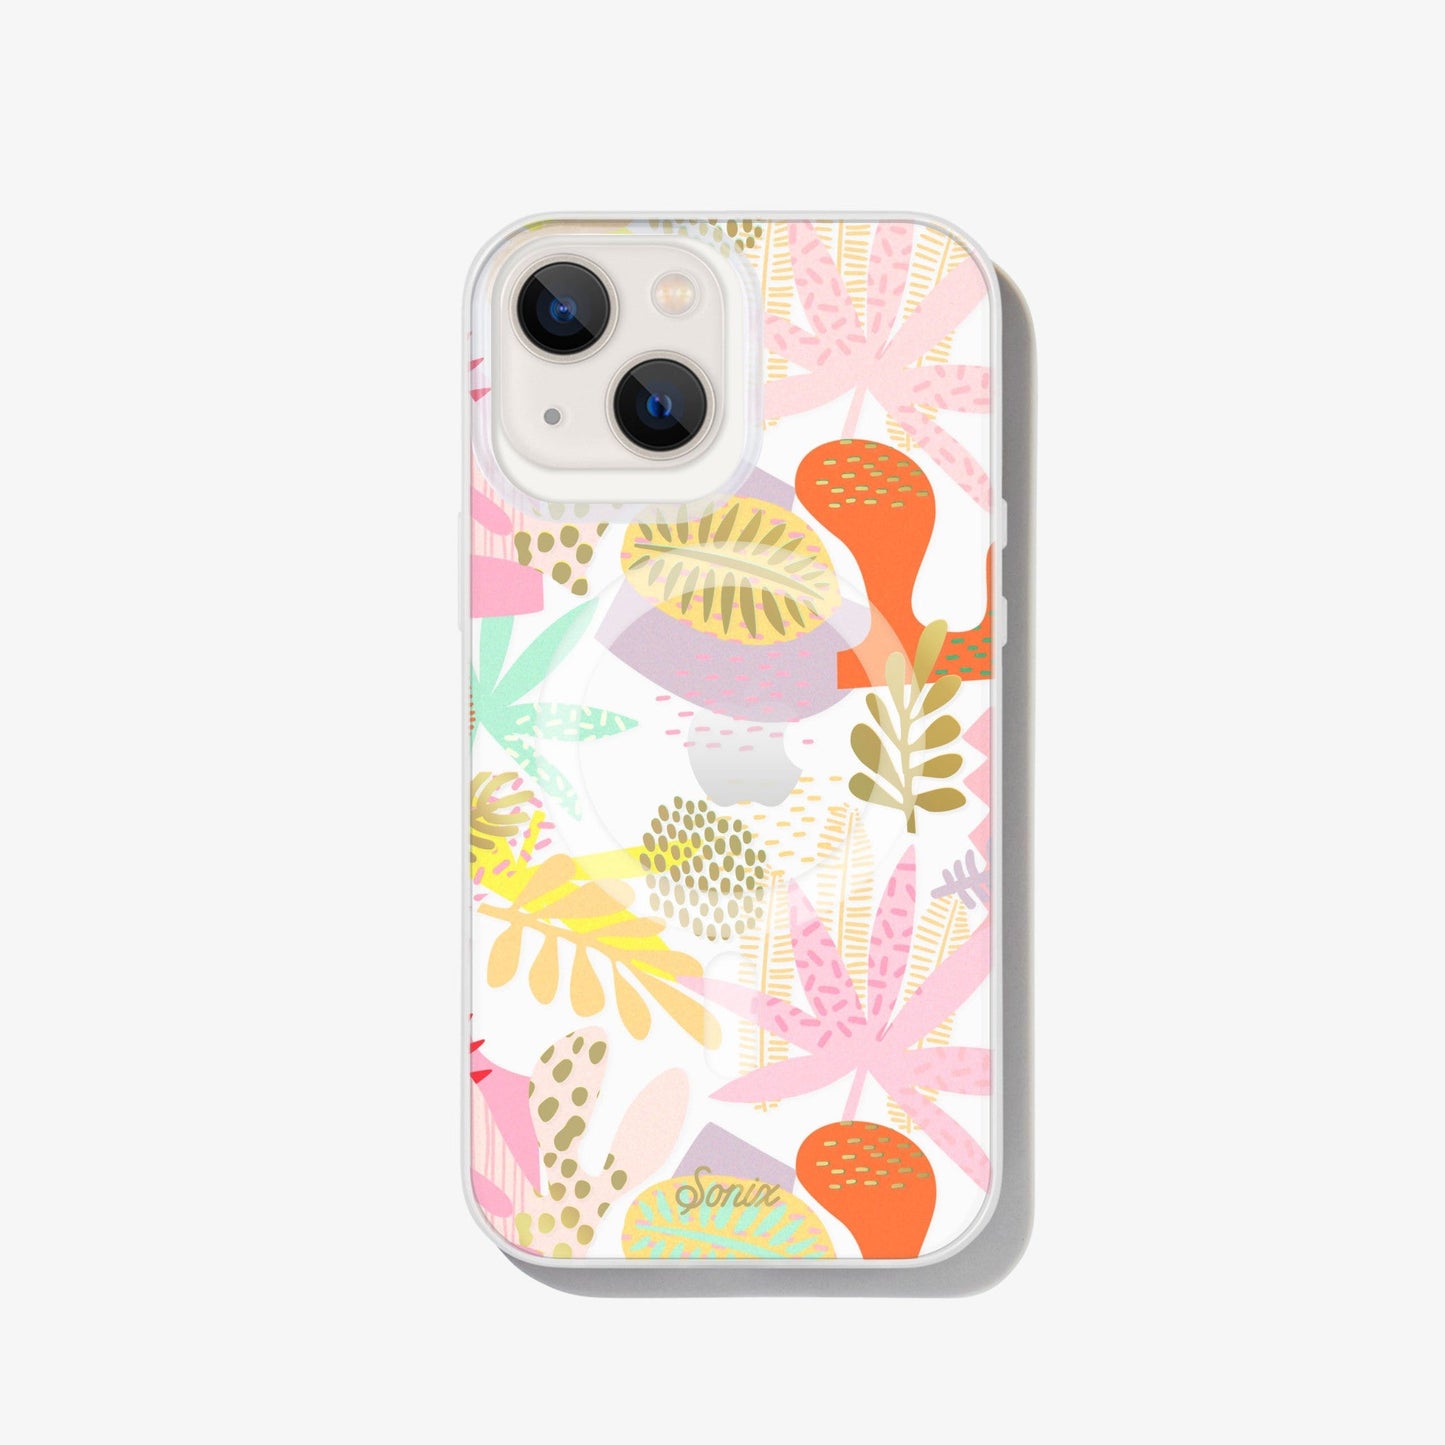 a collection of earthy shapes and forms, like plants and flowers to create a composition of playful abstract art with gold foil details shown on an iphone 13